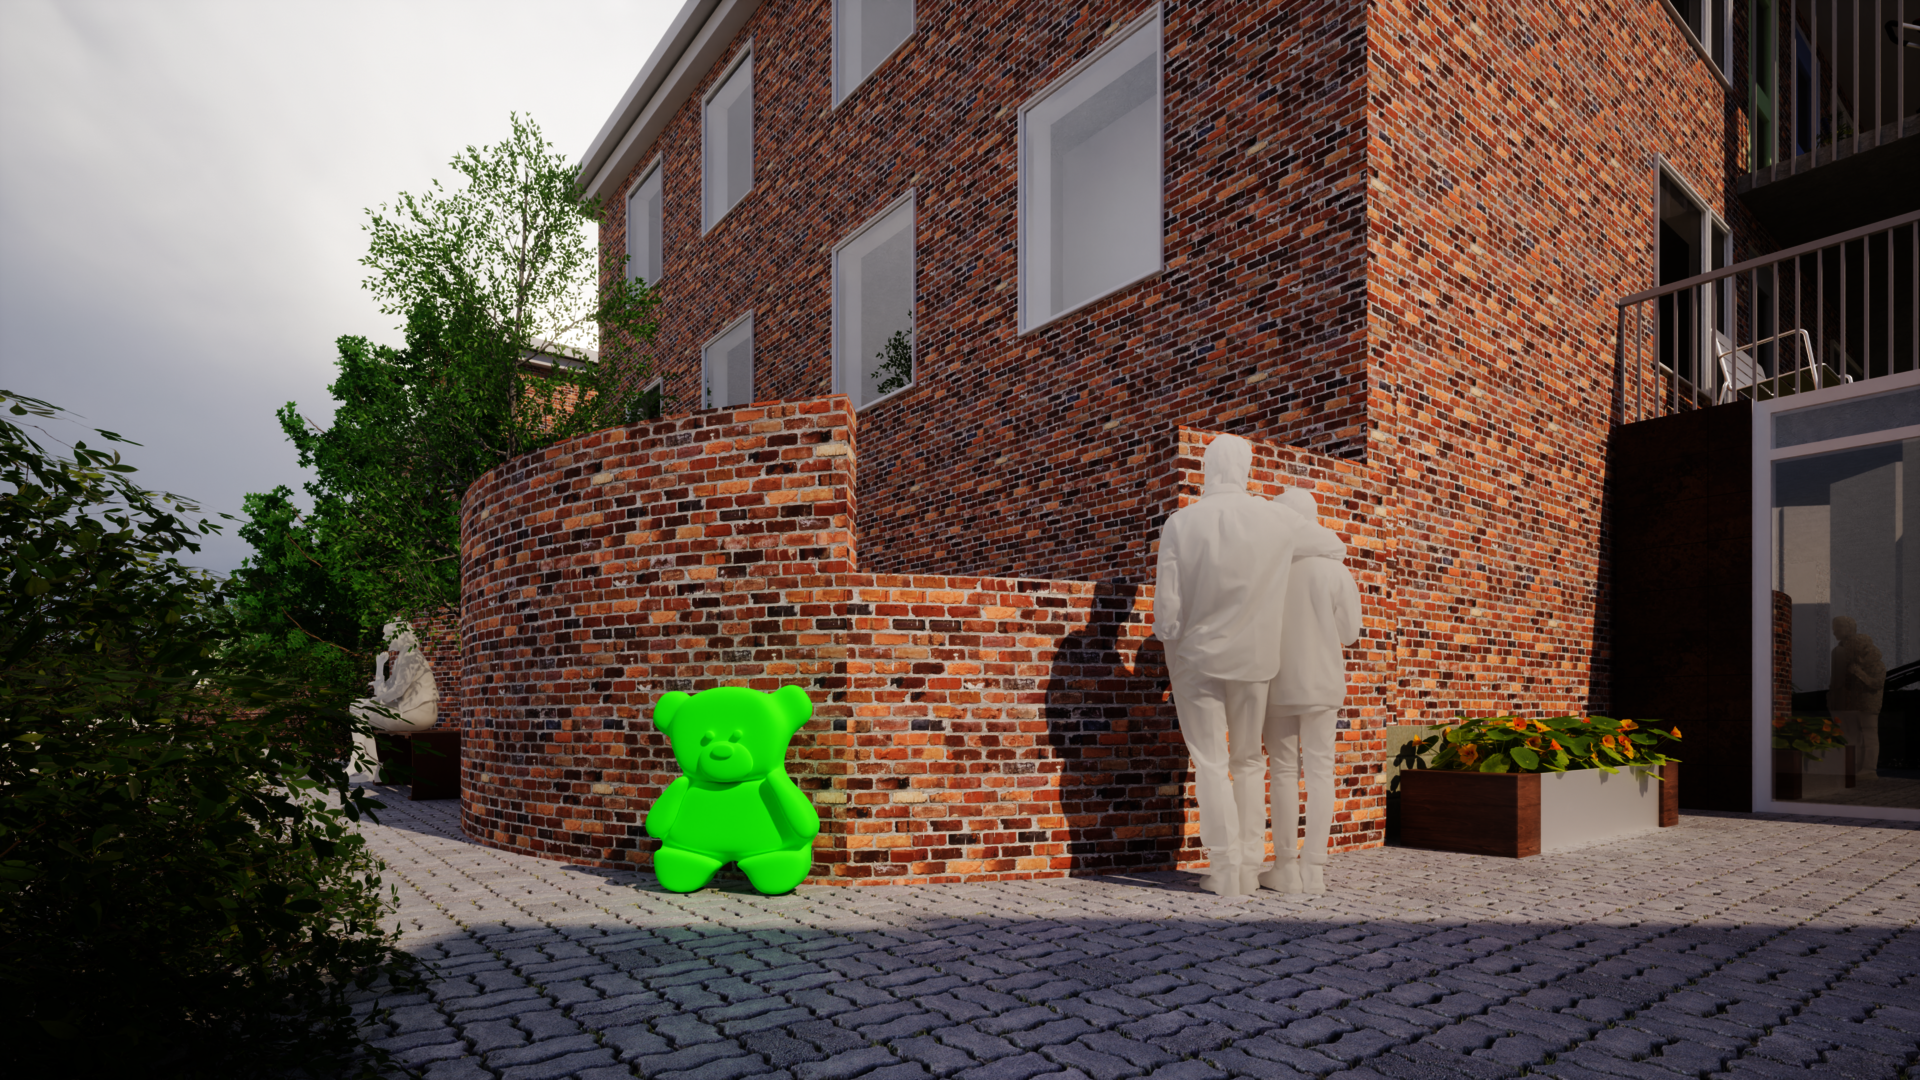 Exterior perspective highlighting the friendly object, the bear, near the front entrance of the site. The friendly object is designed to enhance the arrival experience of the individuals who will live on the site. 